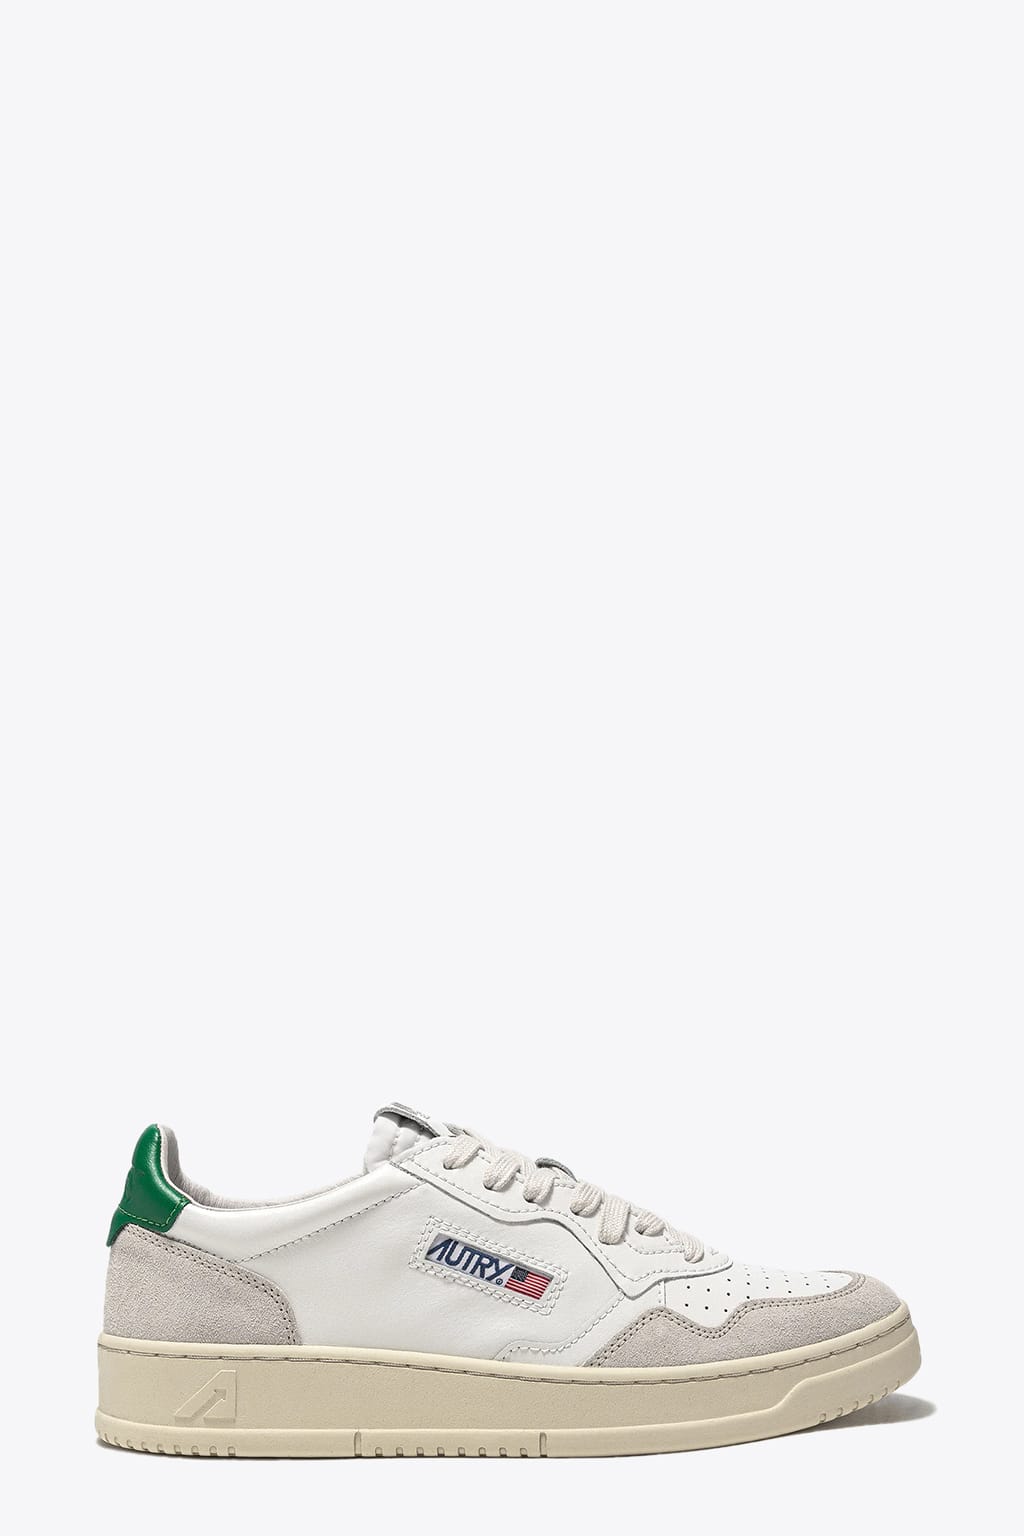 Autry 01 Low Man Leat Suede Wht/amaz White leather and suede low sneaker with green tab - Medalist